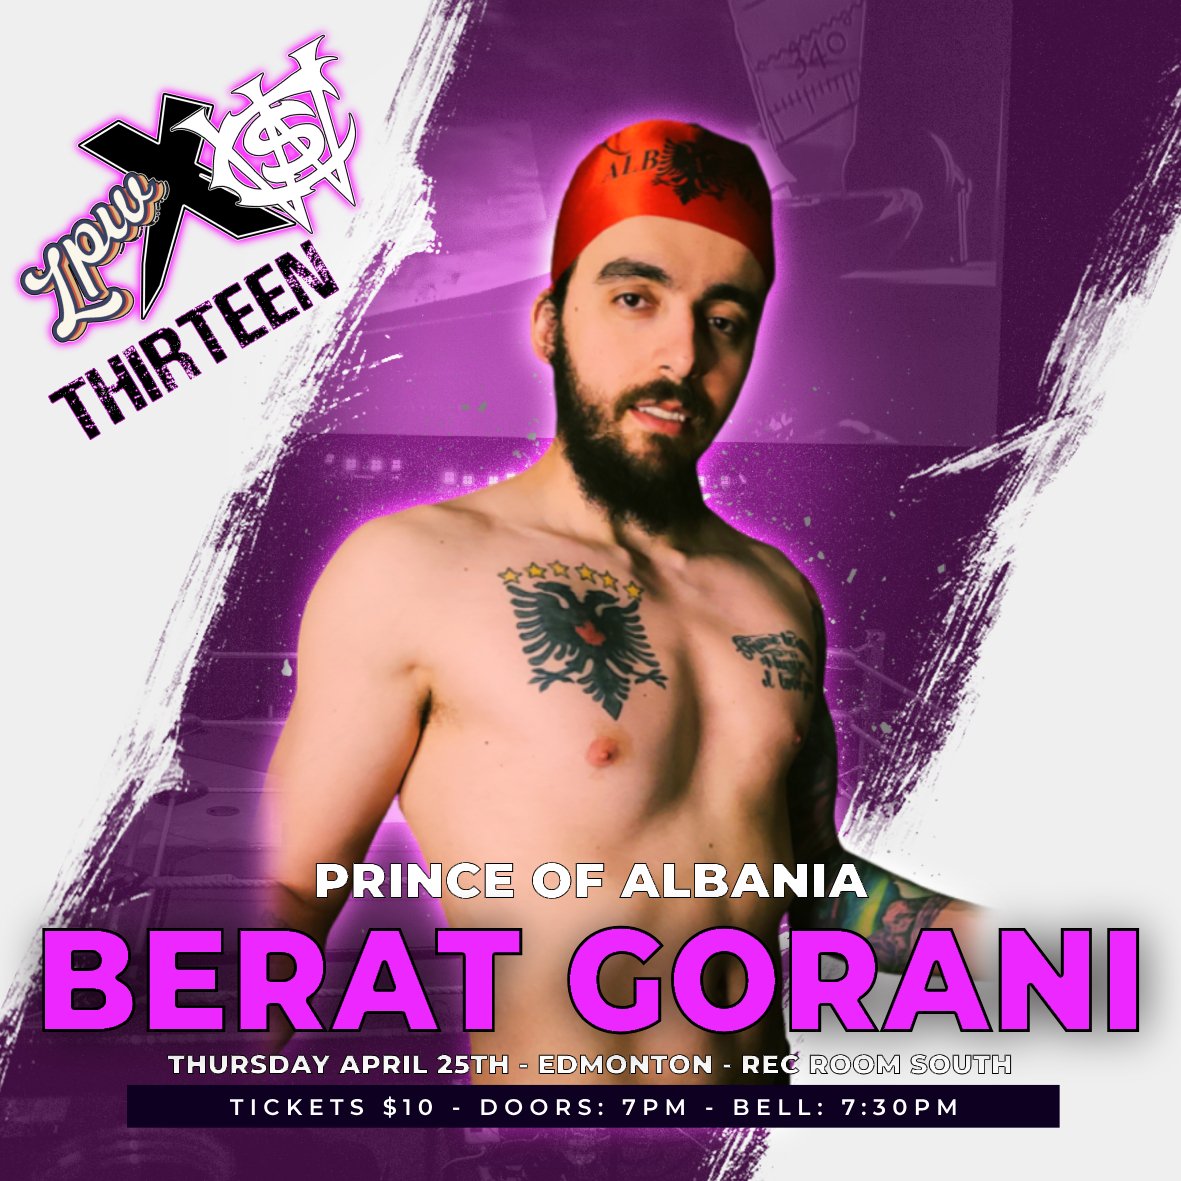 🚨LIVE WRESTLING! EDMONTON!🚨 LPWxCWS #13 - A PREQUEL TO LPW25 THURSDAY! APRIL 25TH! AT THE REC ROOM SOUTH! FEATURING THE PRINCE OF ALBANIA BERAT GORANI TICKETS AVAILABLE IN ADVANCE AT THE LINK OR AT THE DOOR FOR ONLY $10(+fees)! 🎟️ tixr.com/groups/lovewre… 🎟️ BE THERE! JOIN